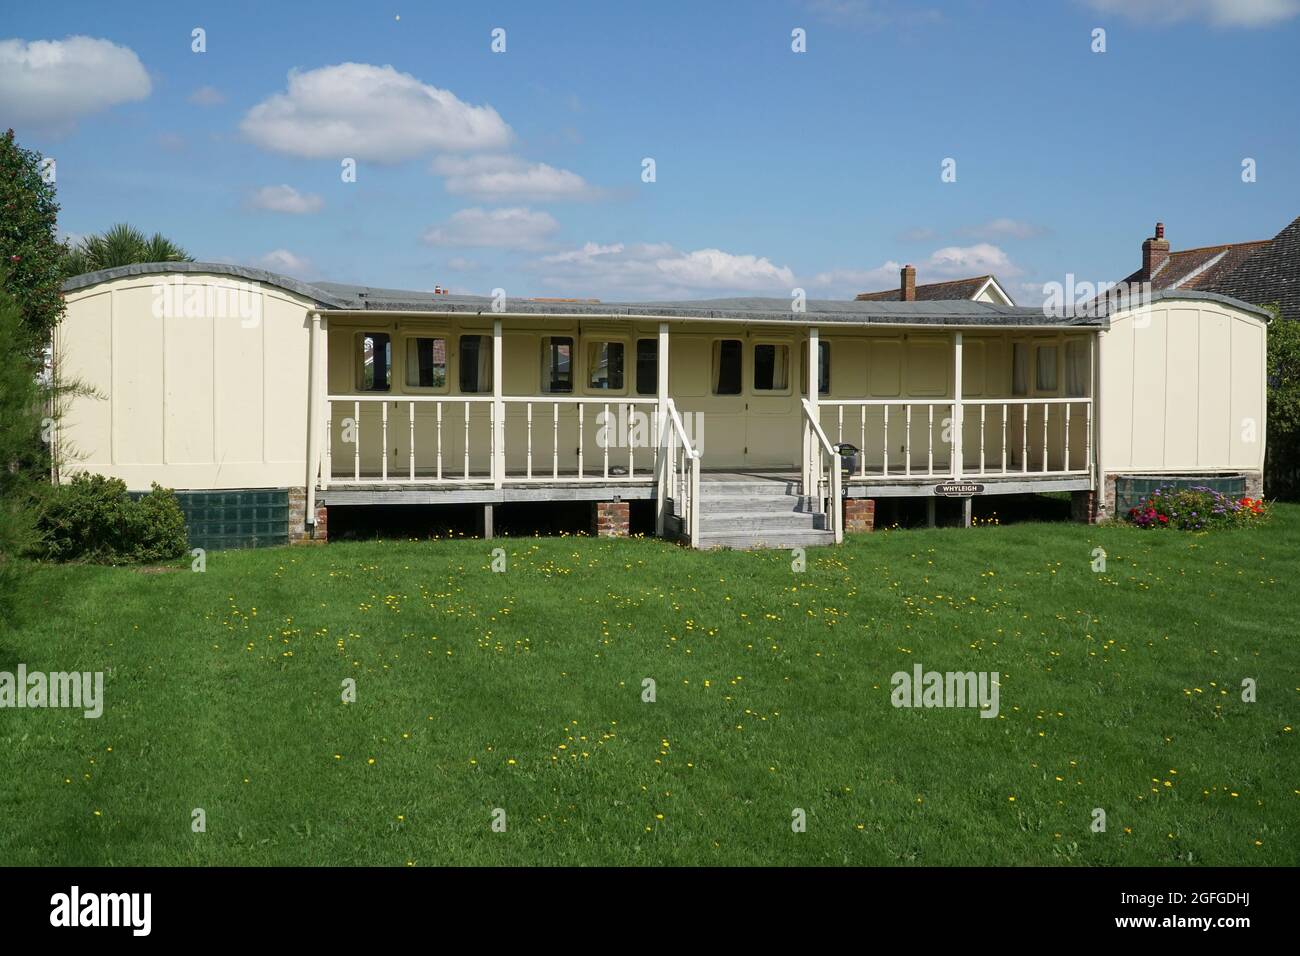 East Wittering, UK, 25 August 2021: In the West Sussex village of East Wittering several homes have been built around disused railway carriages. This Stock Photo